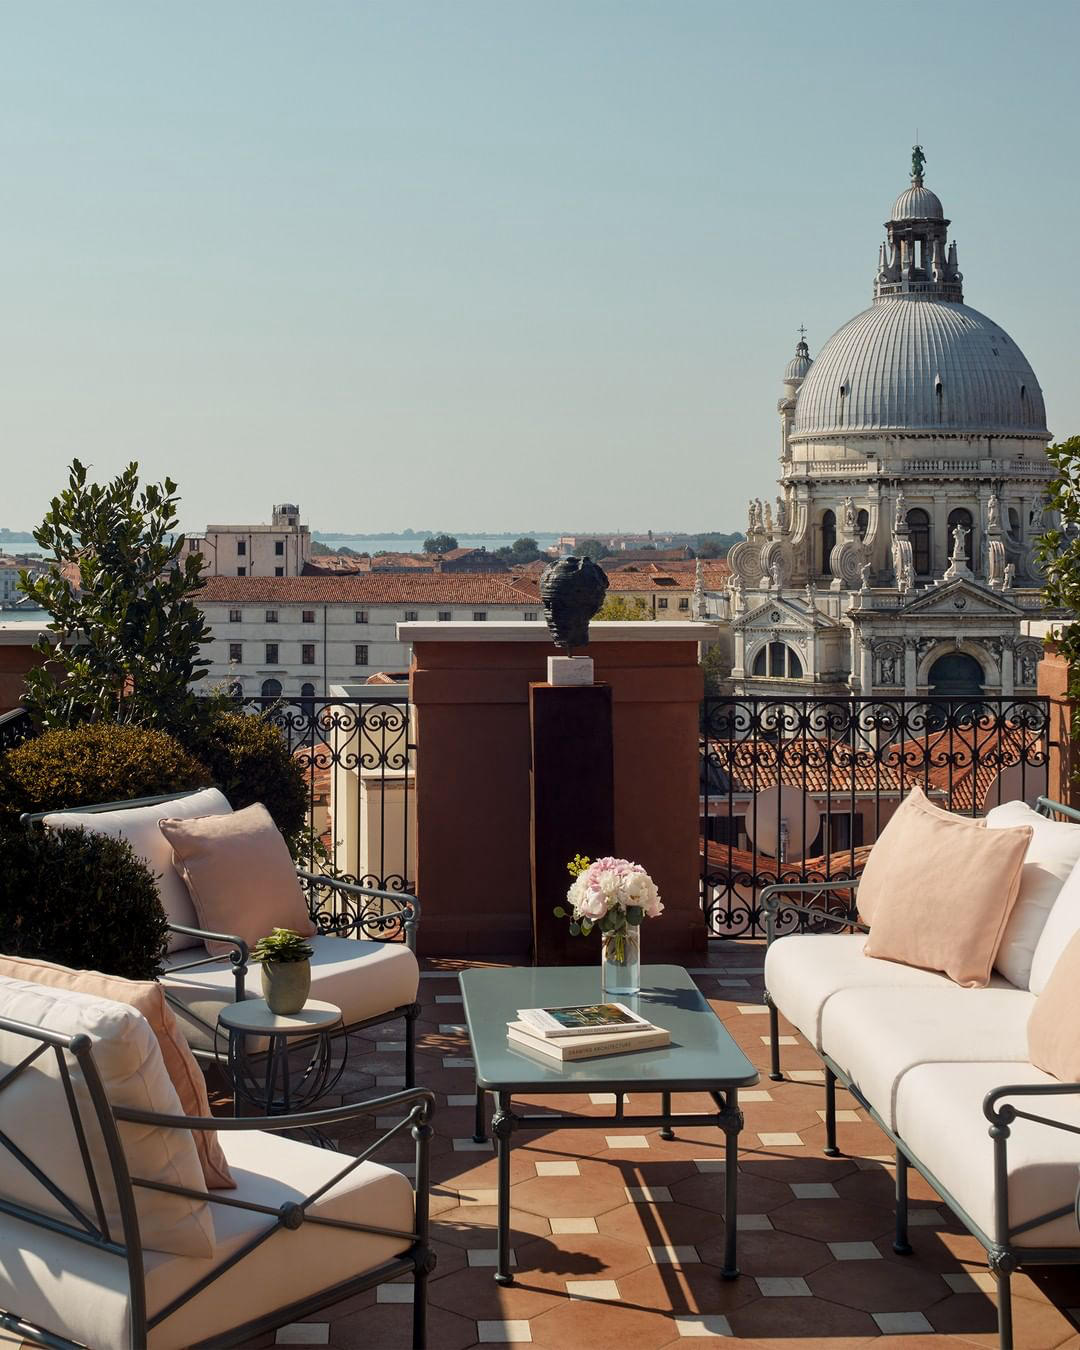 image  1 The St. Regis Venice - Perched on the city's skyline, our Private Terraces are unique rarities overl